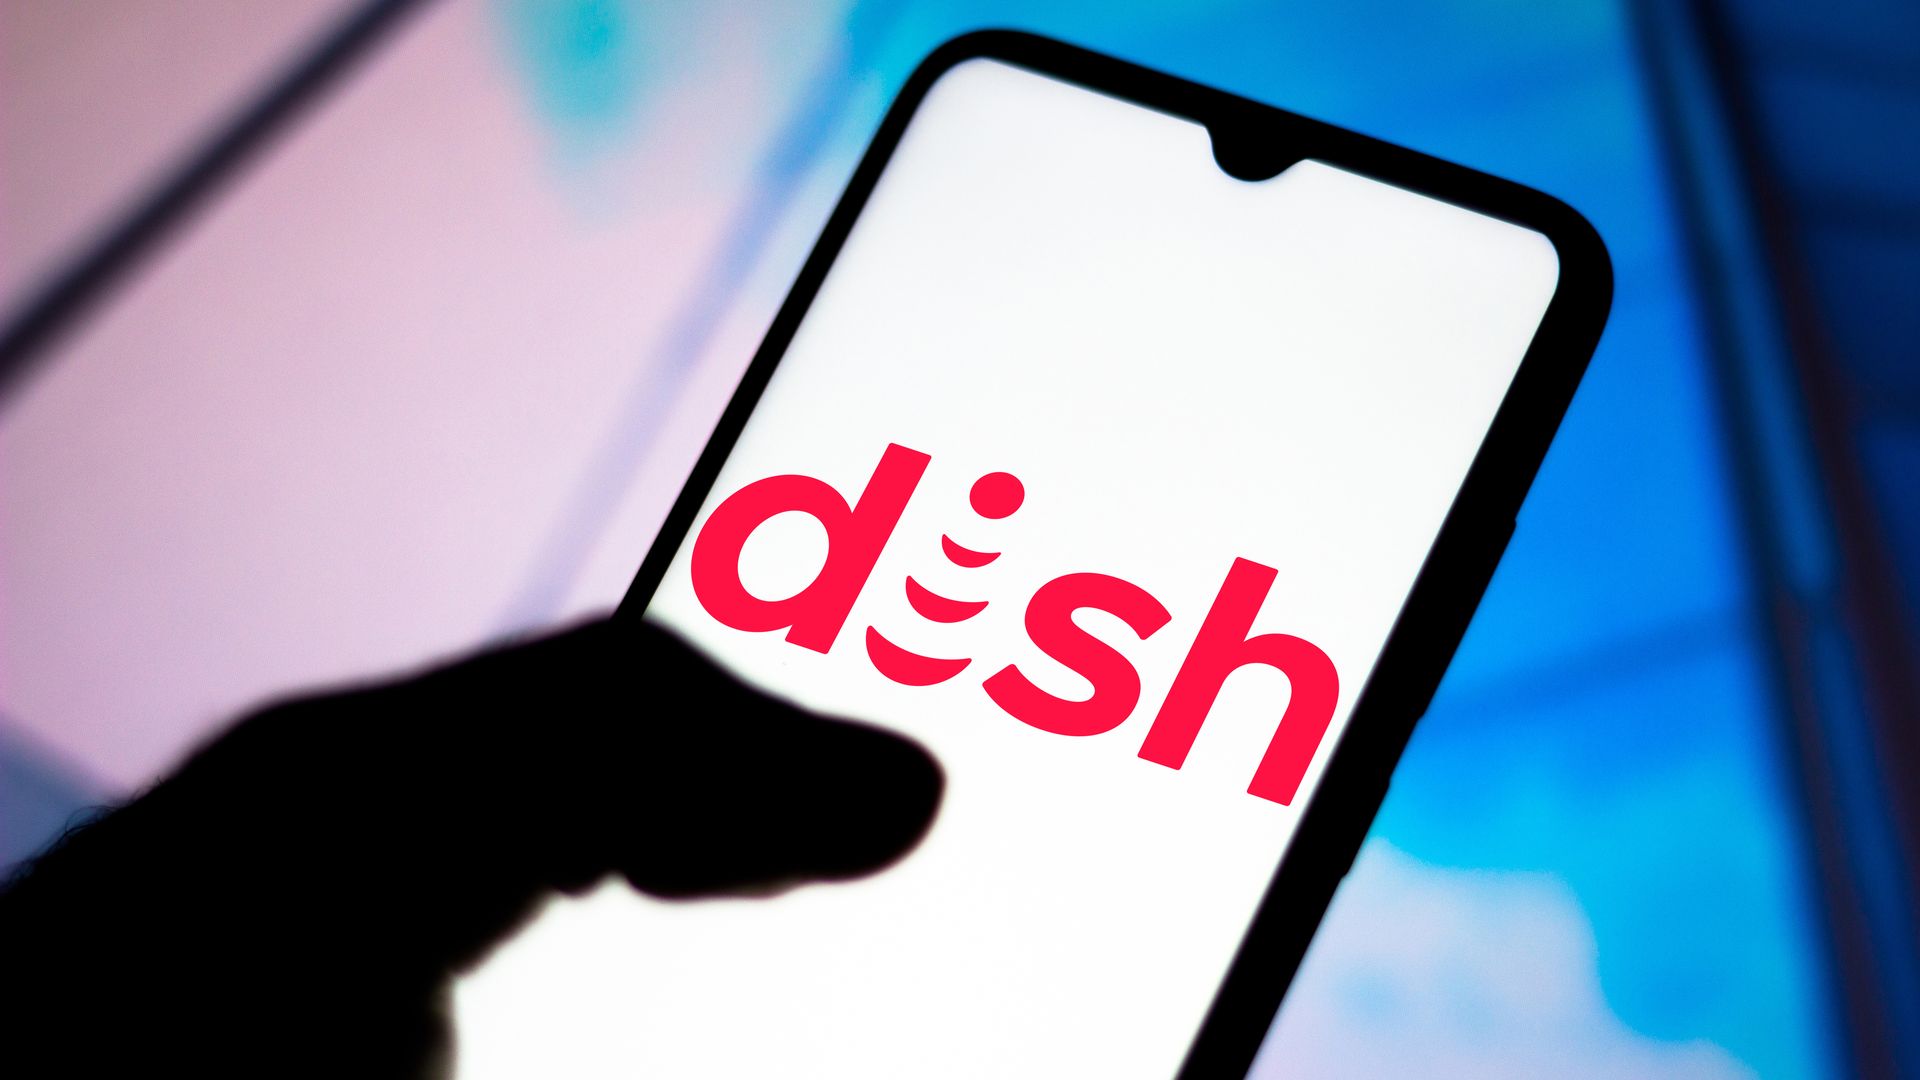 A photo illustration of the Dish Network logo on a smartphone